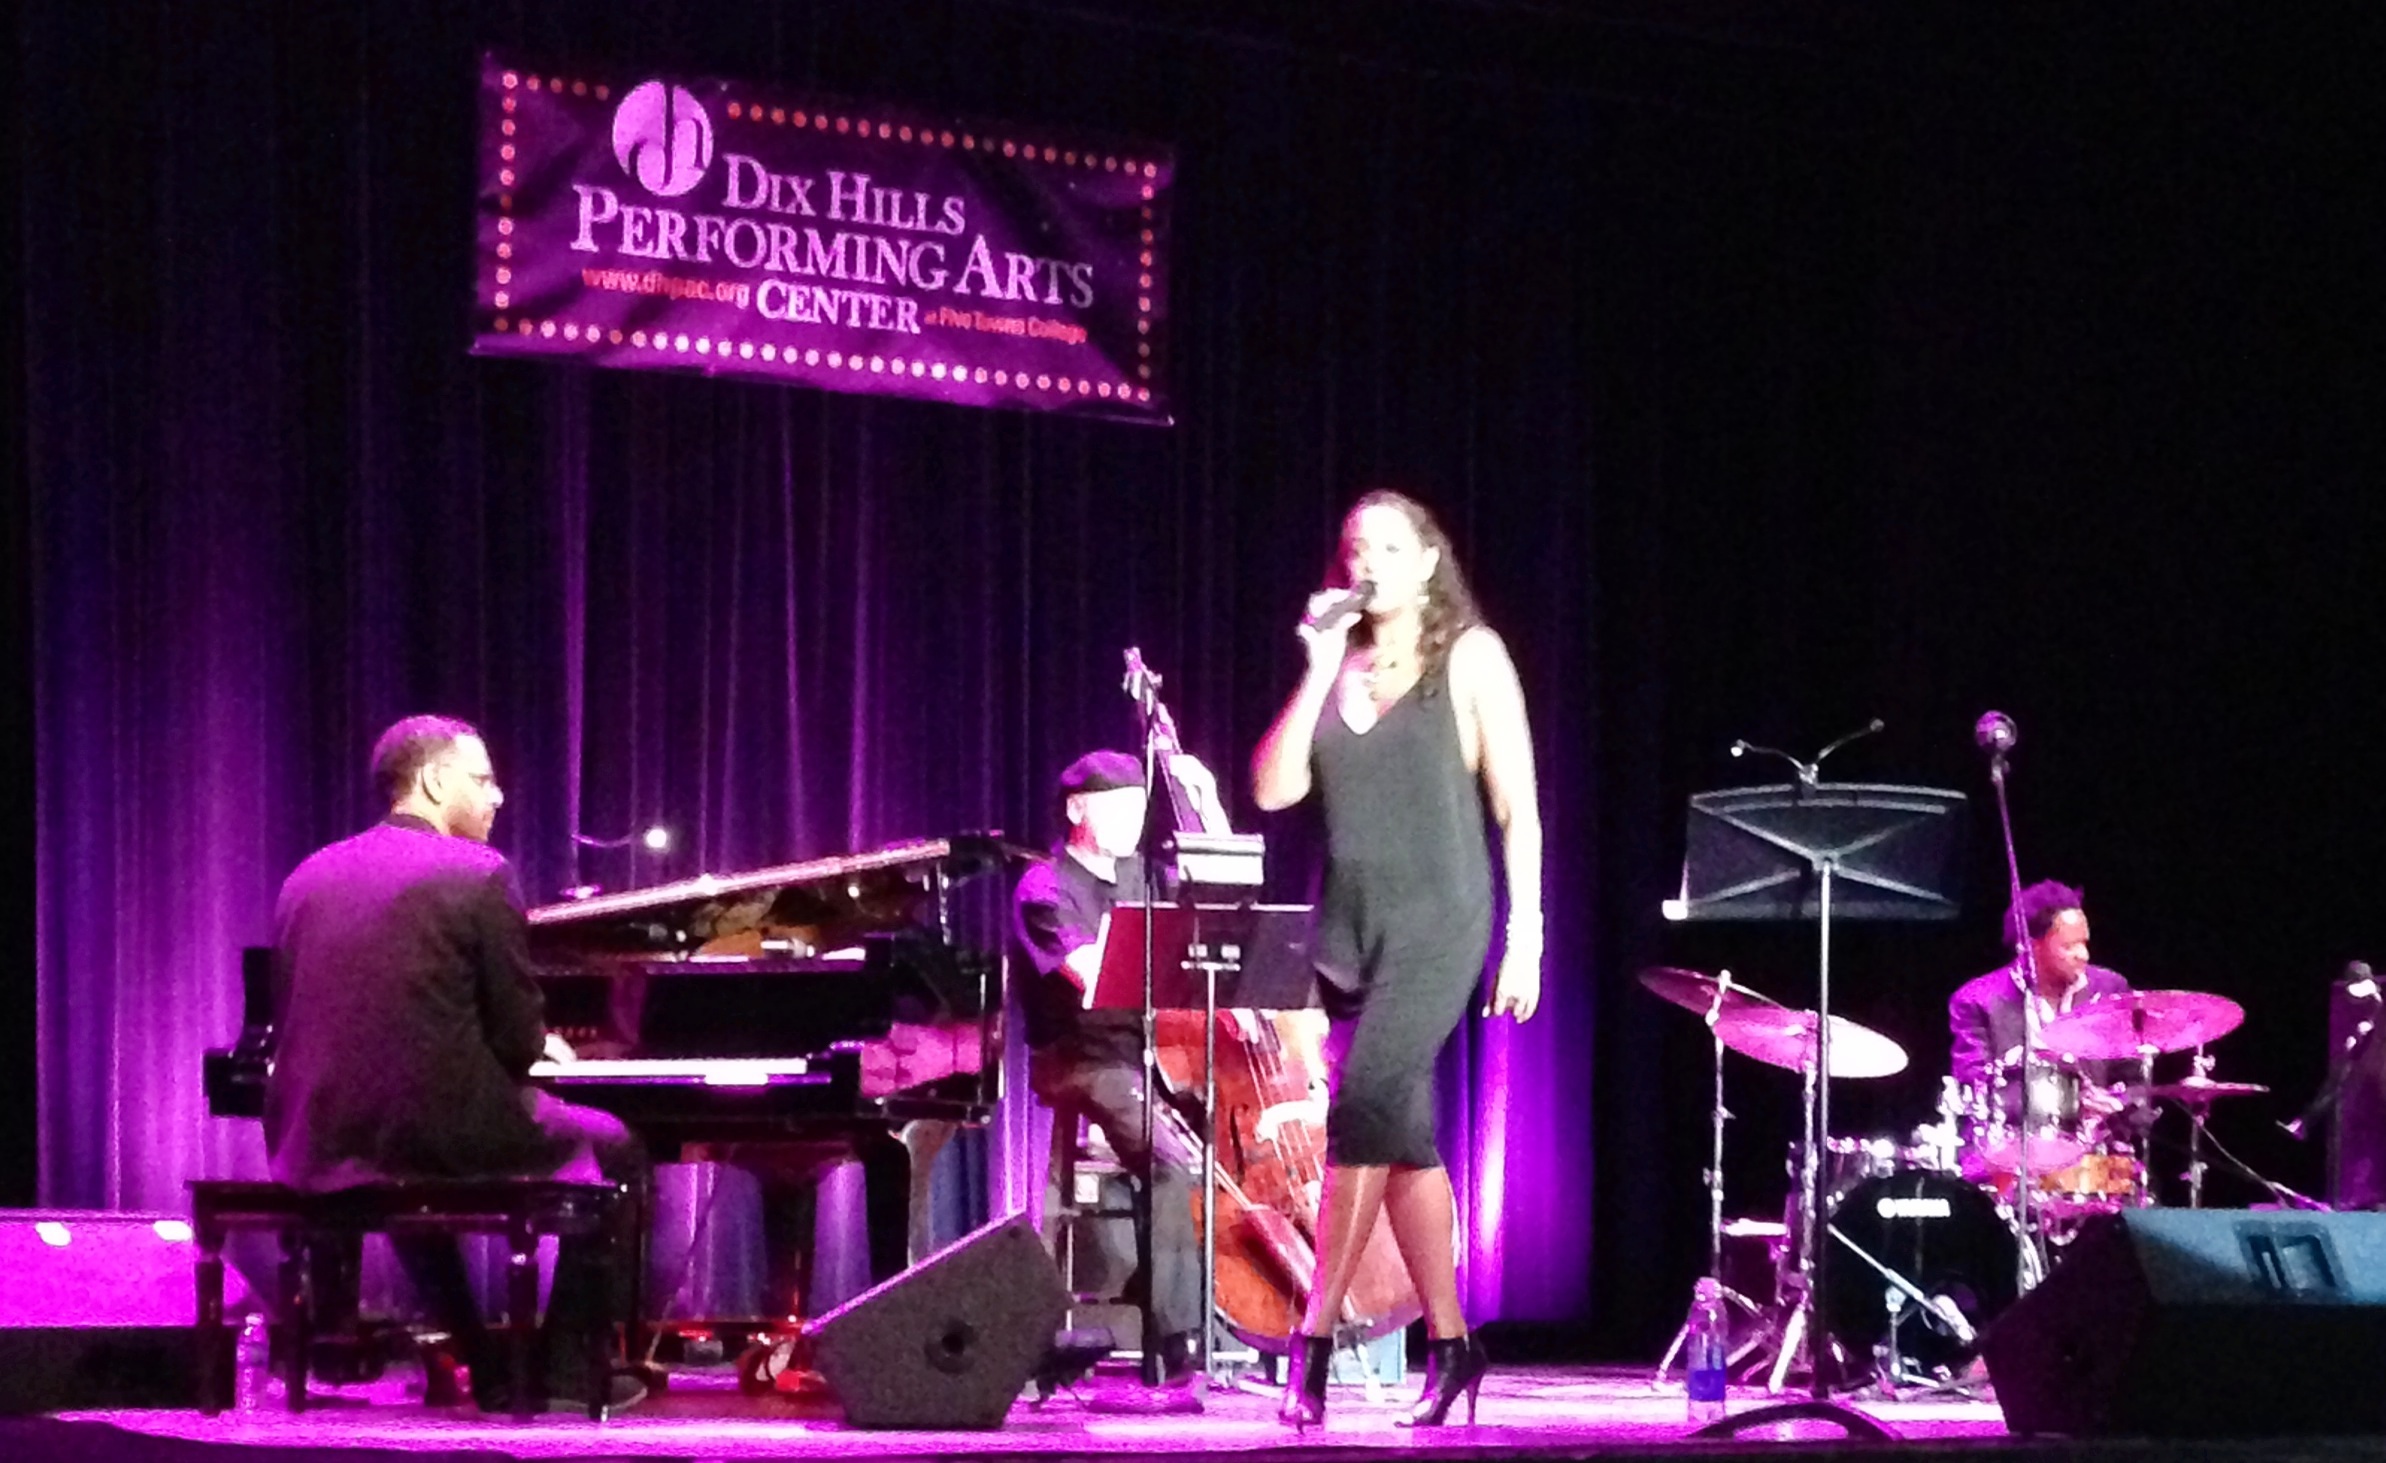 LA TANYA HALL PERFORMS “FROM SARAH VAUGHAN, WITH LOVE” mar 30 2014